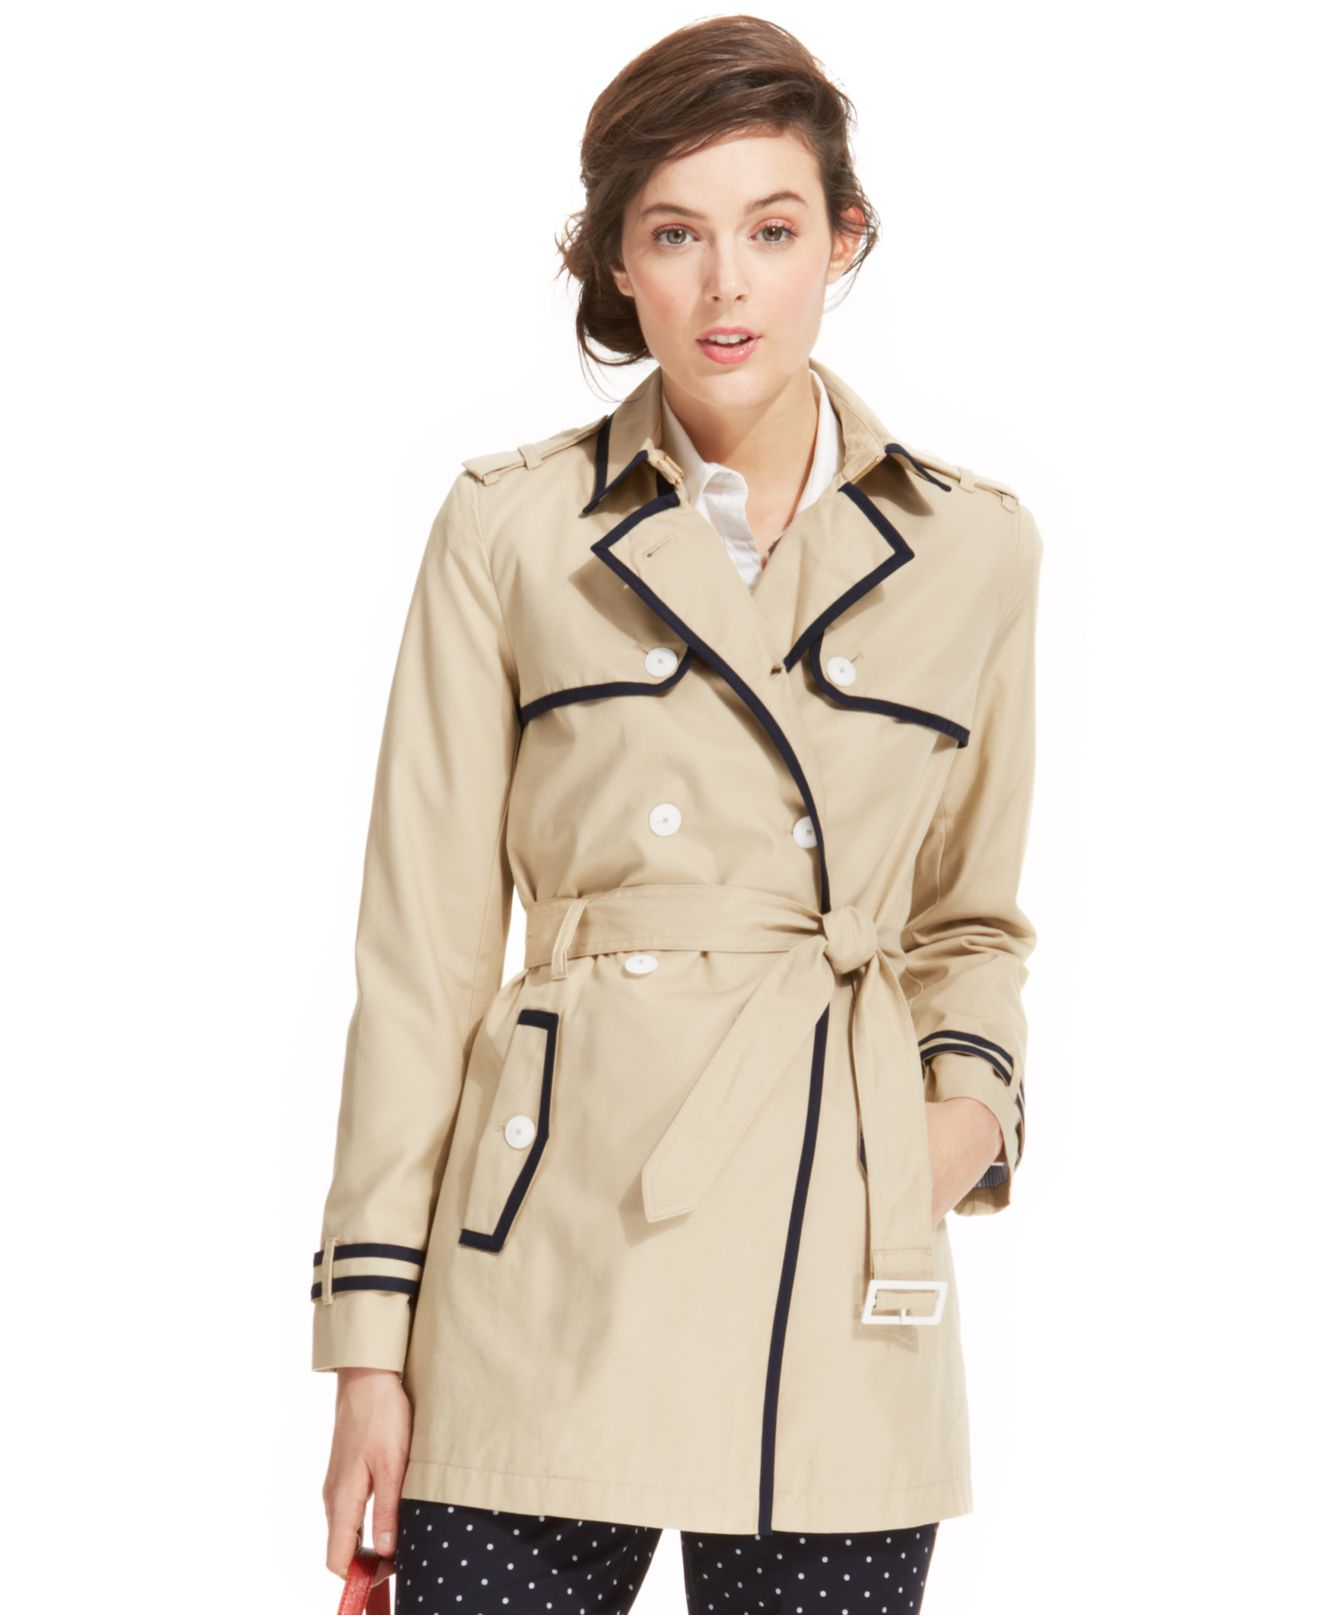 Lyst - Tommy Hilfiger Piped Trench Coat in Natural